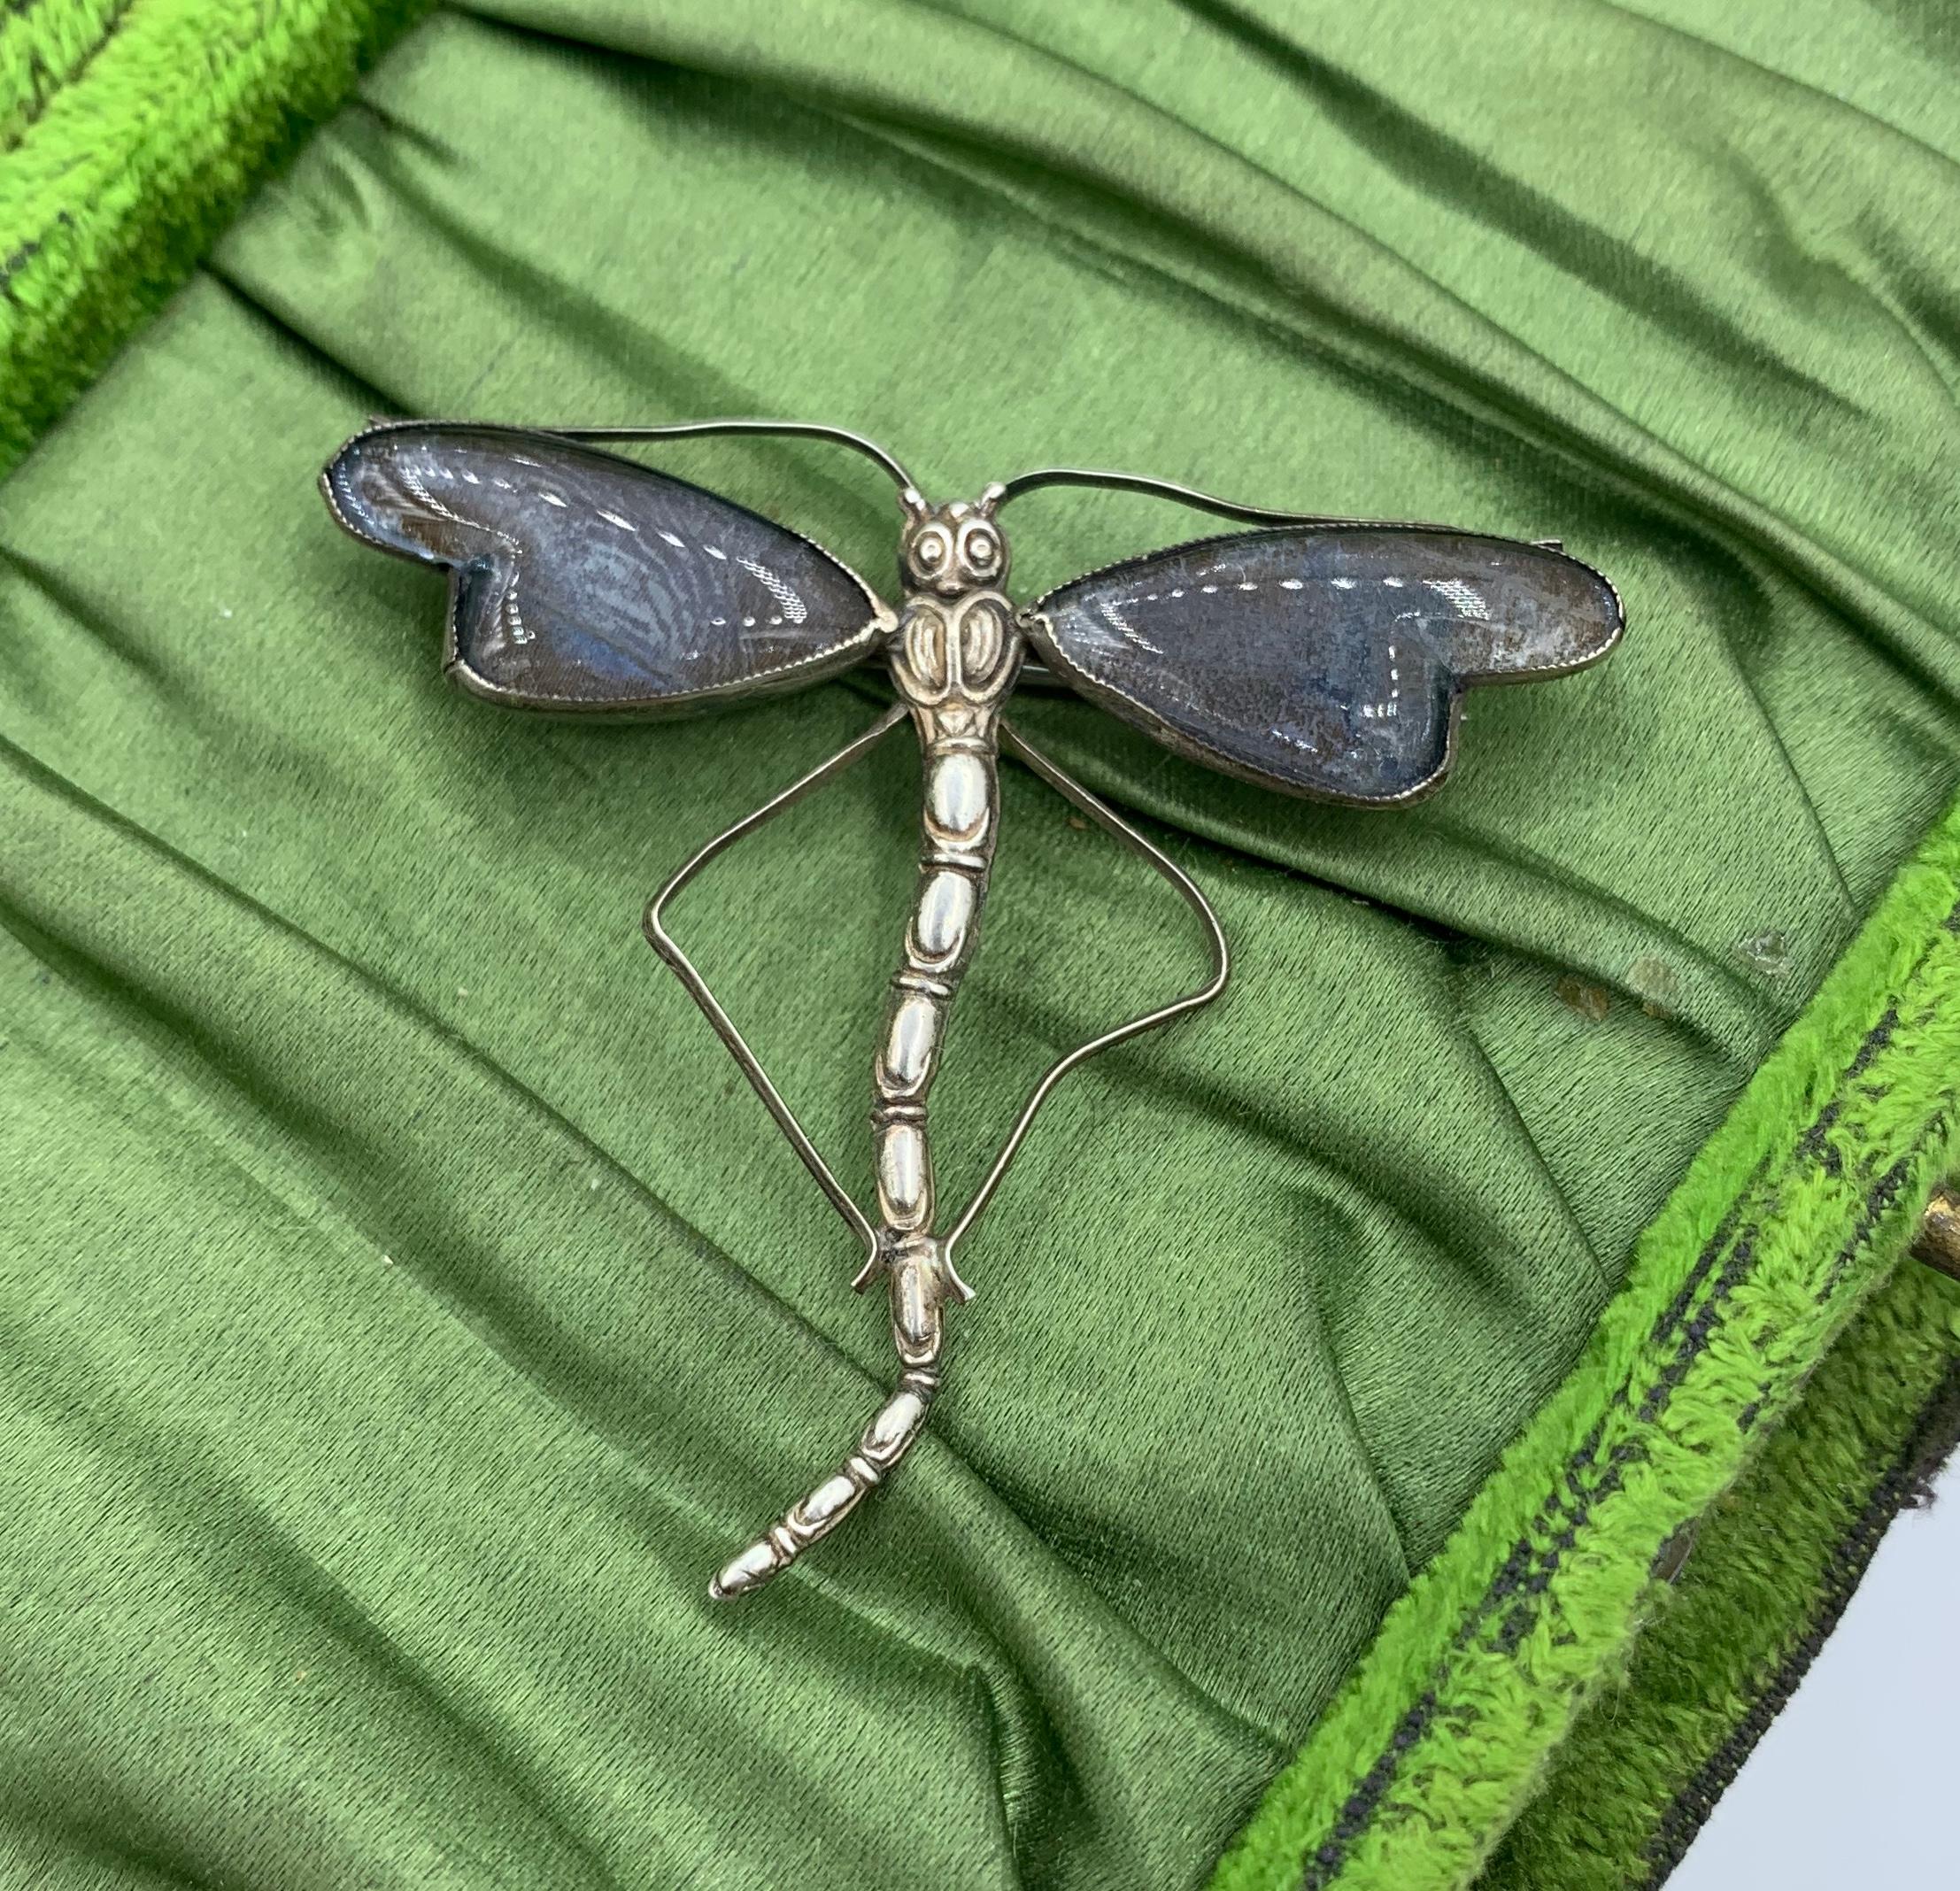 This is a stunning Art Nouveau - Art Deco Dragonfly Insect Moth Brooch Pin with extraordinary iridescent Butterfly Wings set in Sterling Silver.  The natural Butterfly Wings are set behind glass to create the wings of the dragonfly!  The jewel has